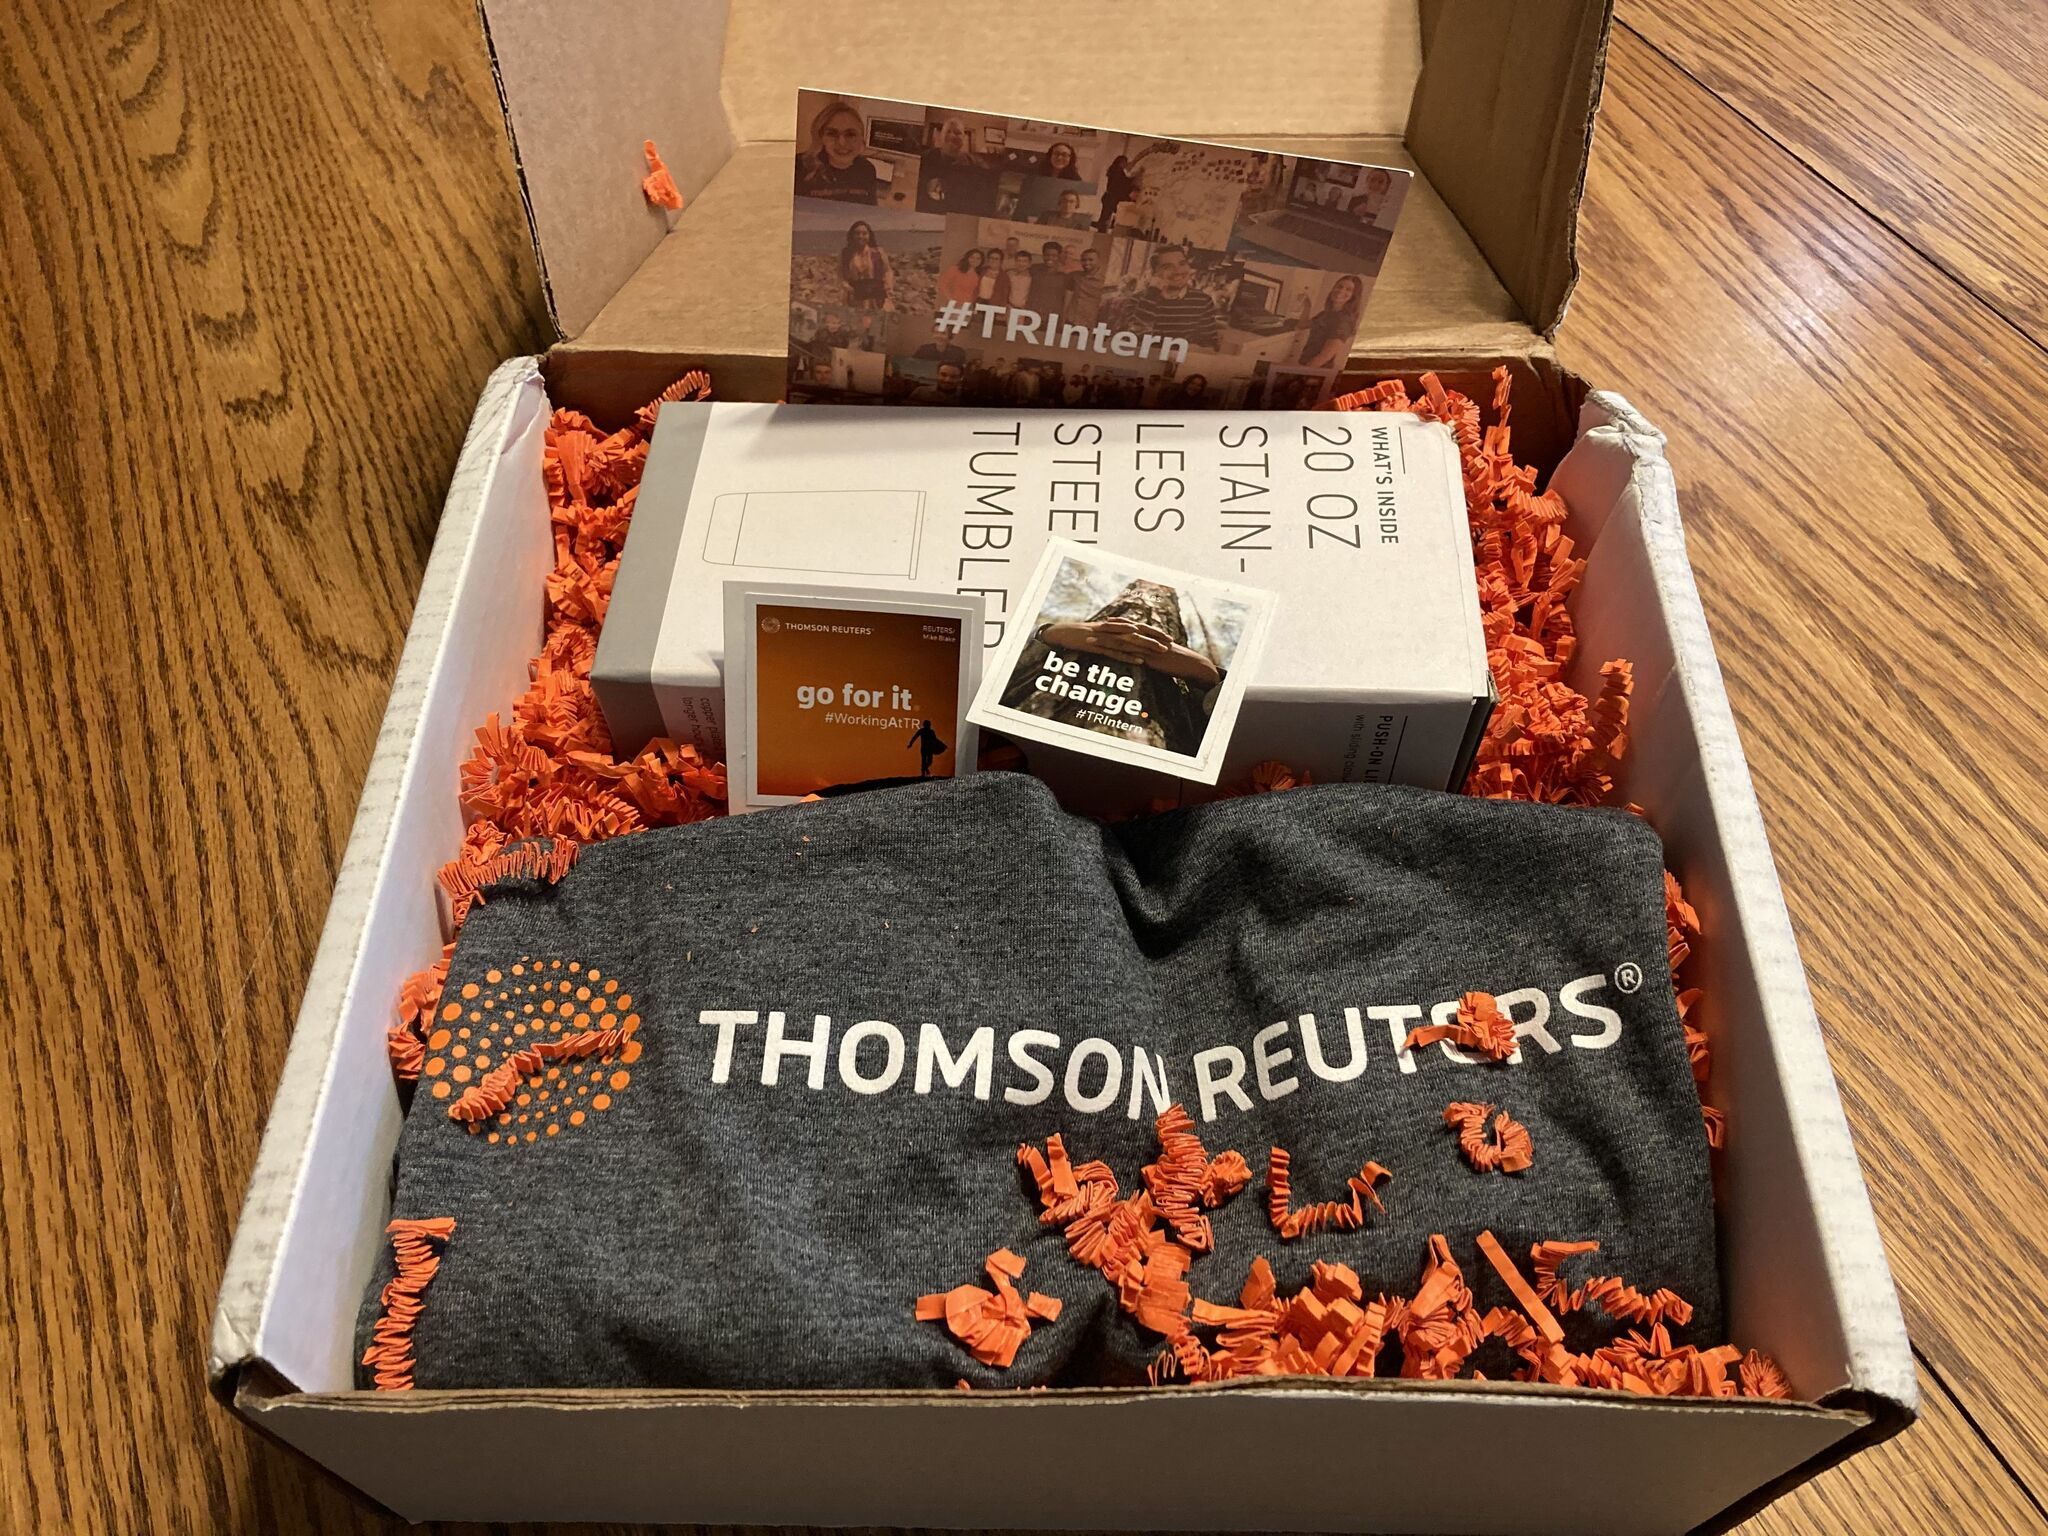 Box of branded swag for interns from Thomson Reuters 